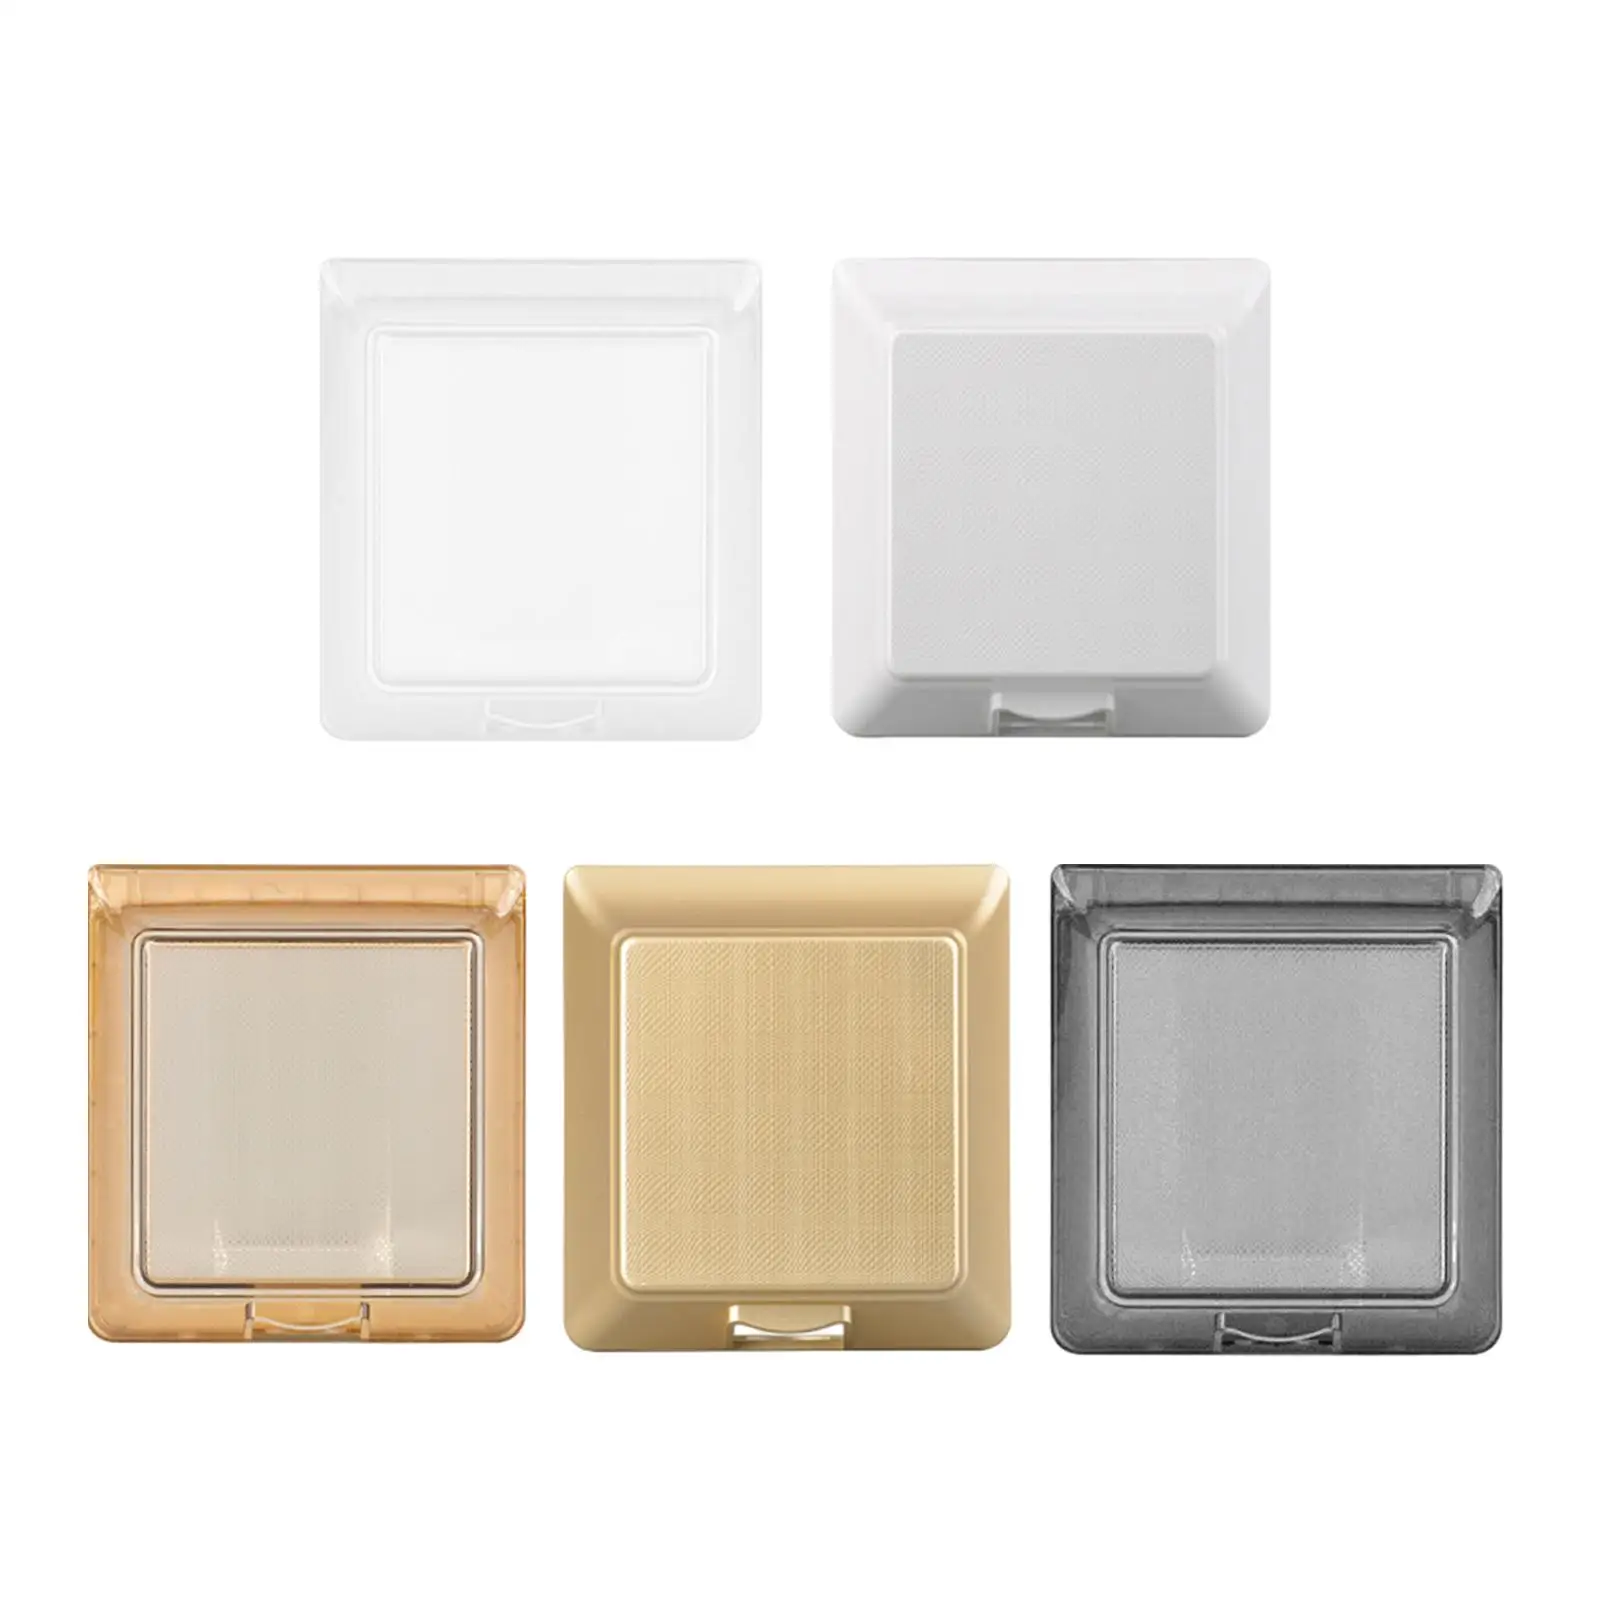 Switch Cover Waterproof Outdoor Plug and Receptacle Protector Wall Switch Box for Living Room Workshop Office Home Improvement